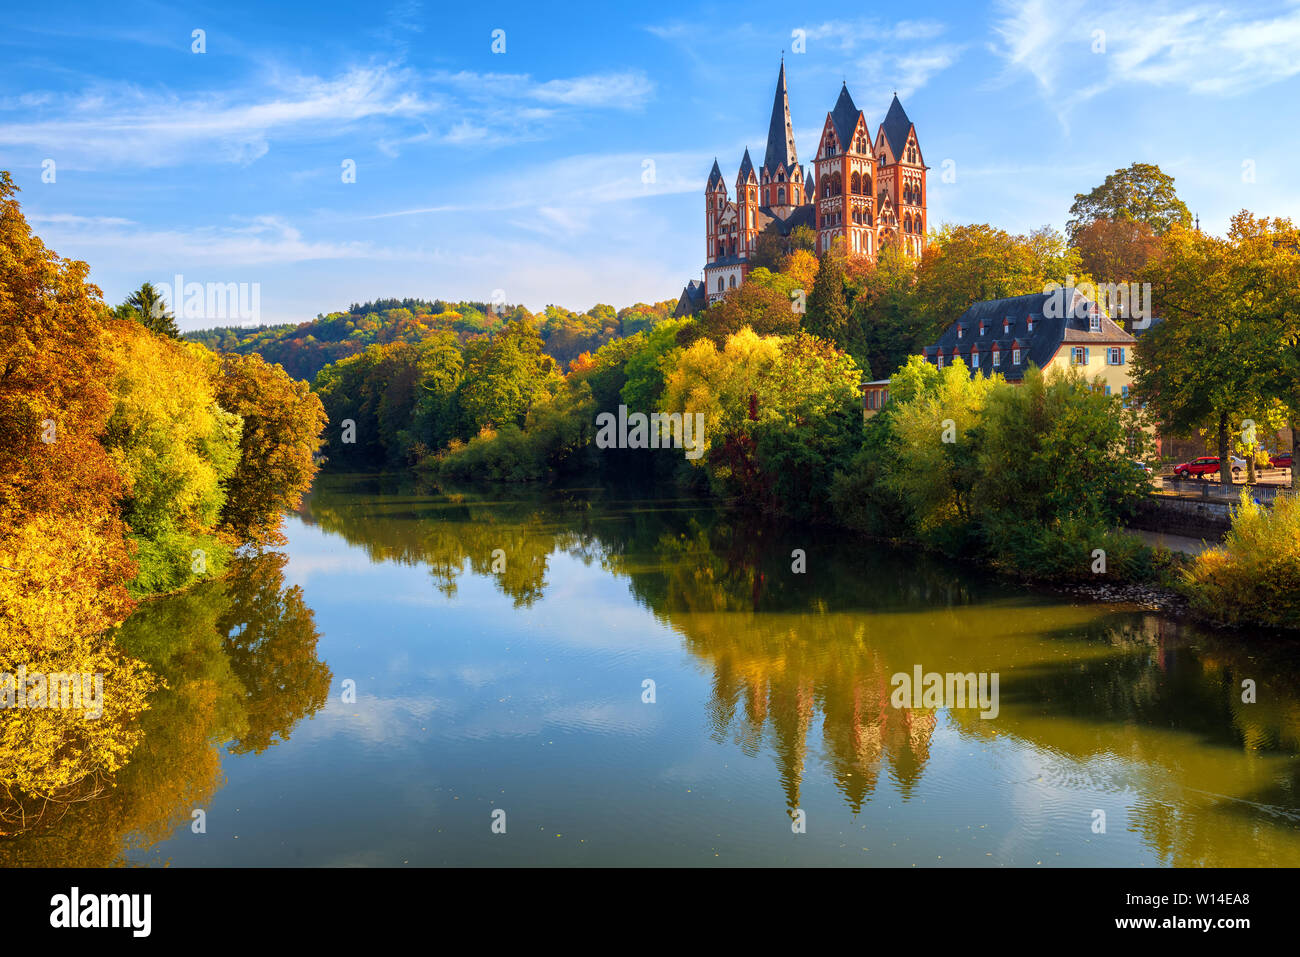 Limburg an der Lahn town, Germany, view of the cathedral reflecting in Lahn river in autumn Stock Photo